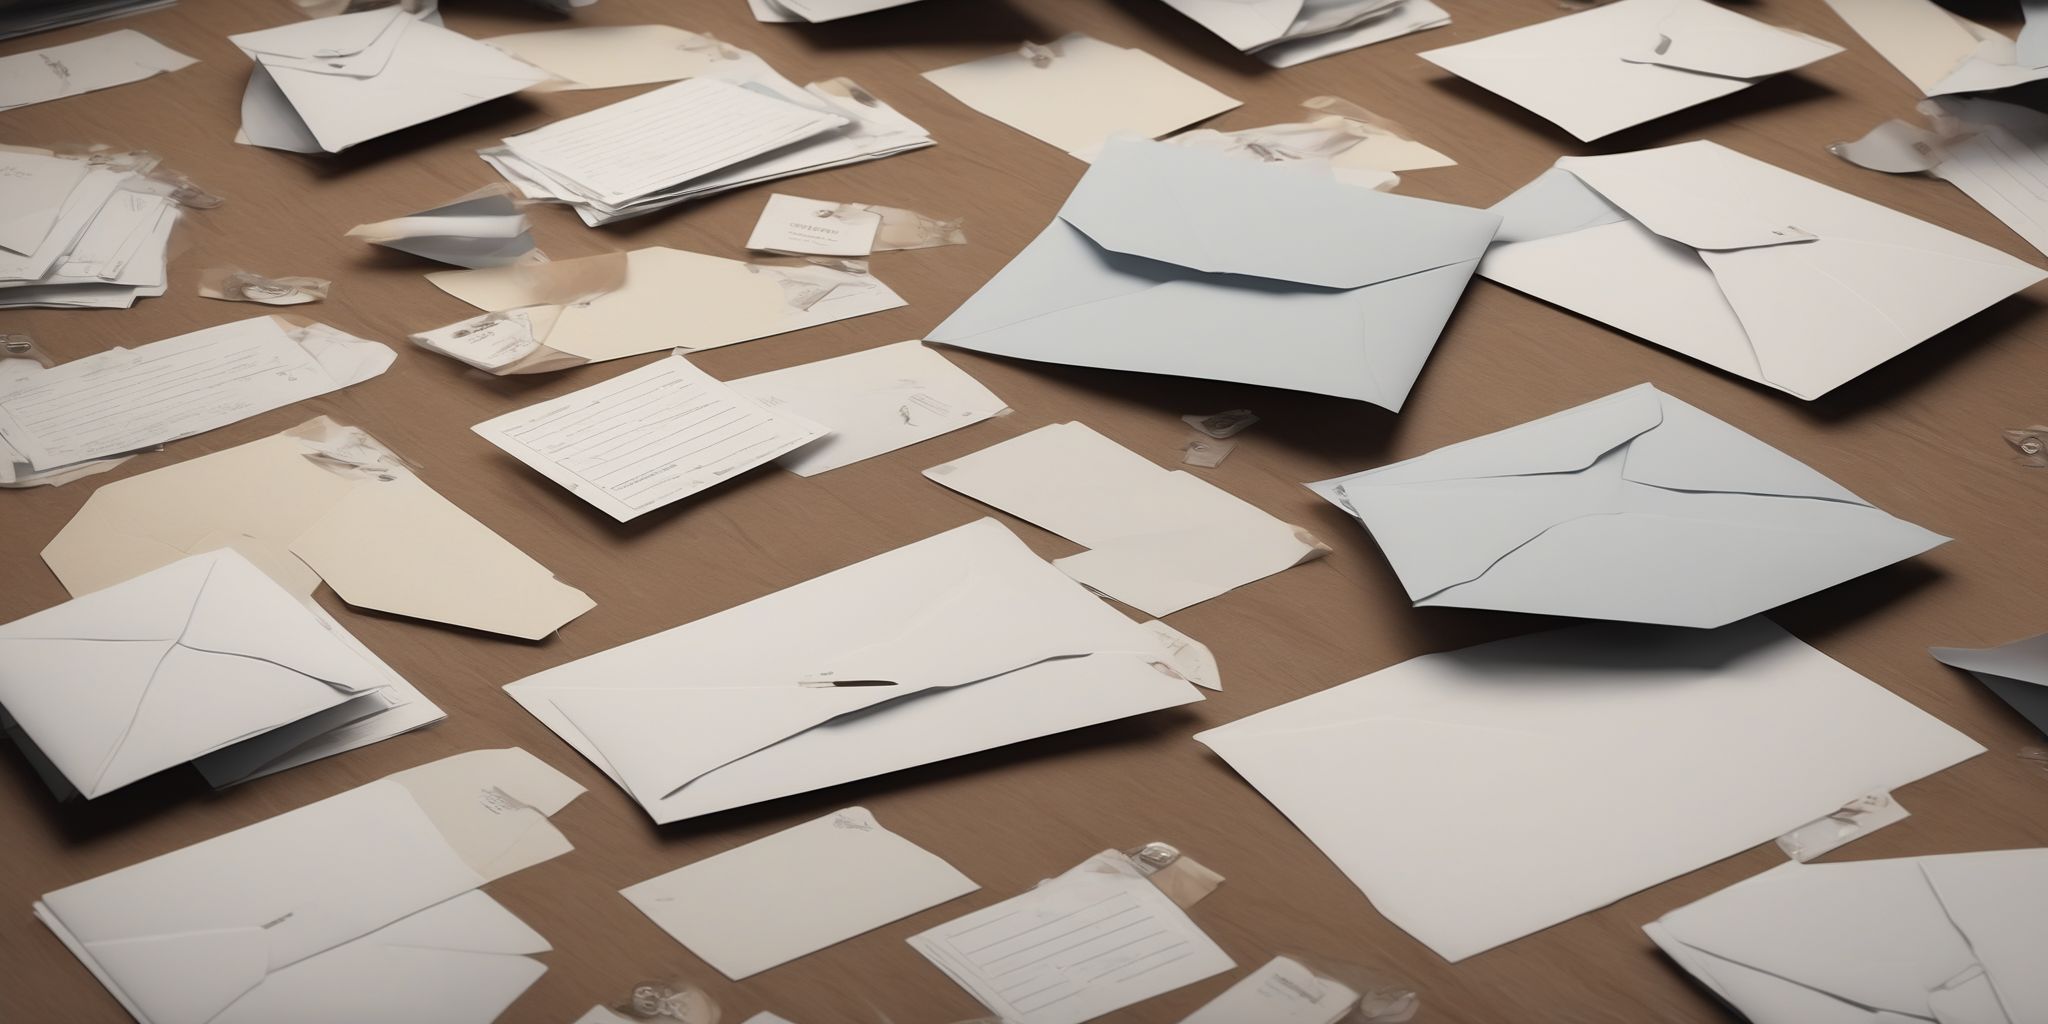 Envelope system  in realistic, photographic style